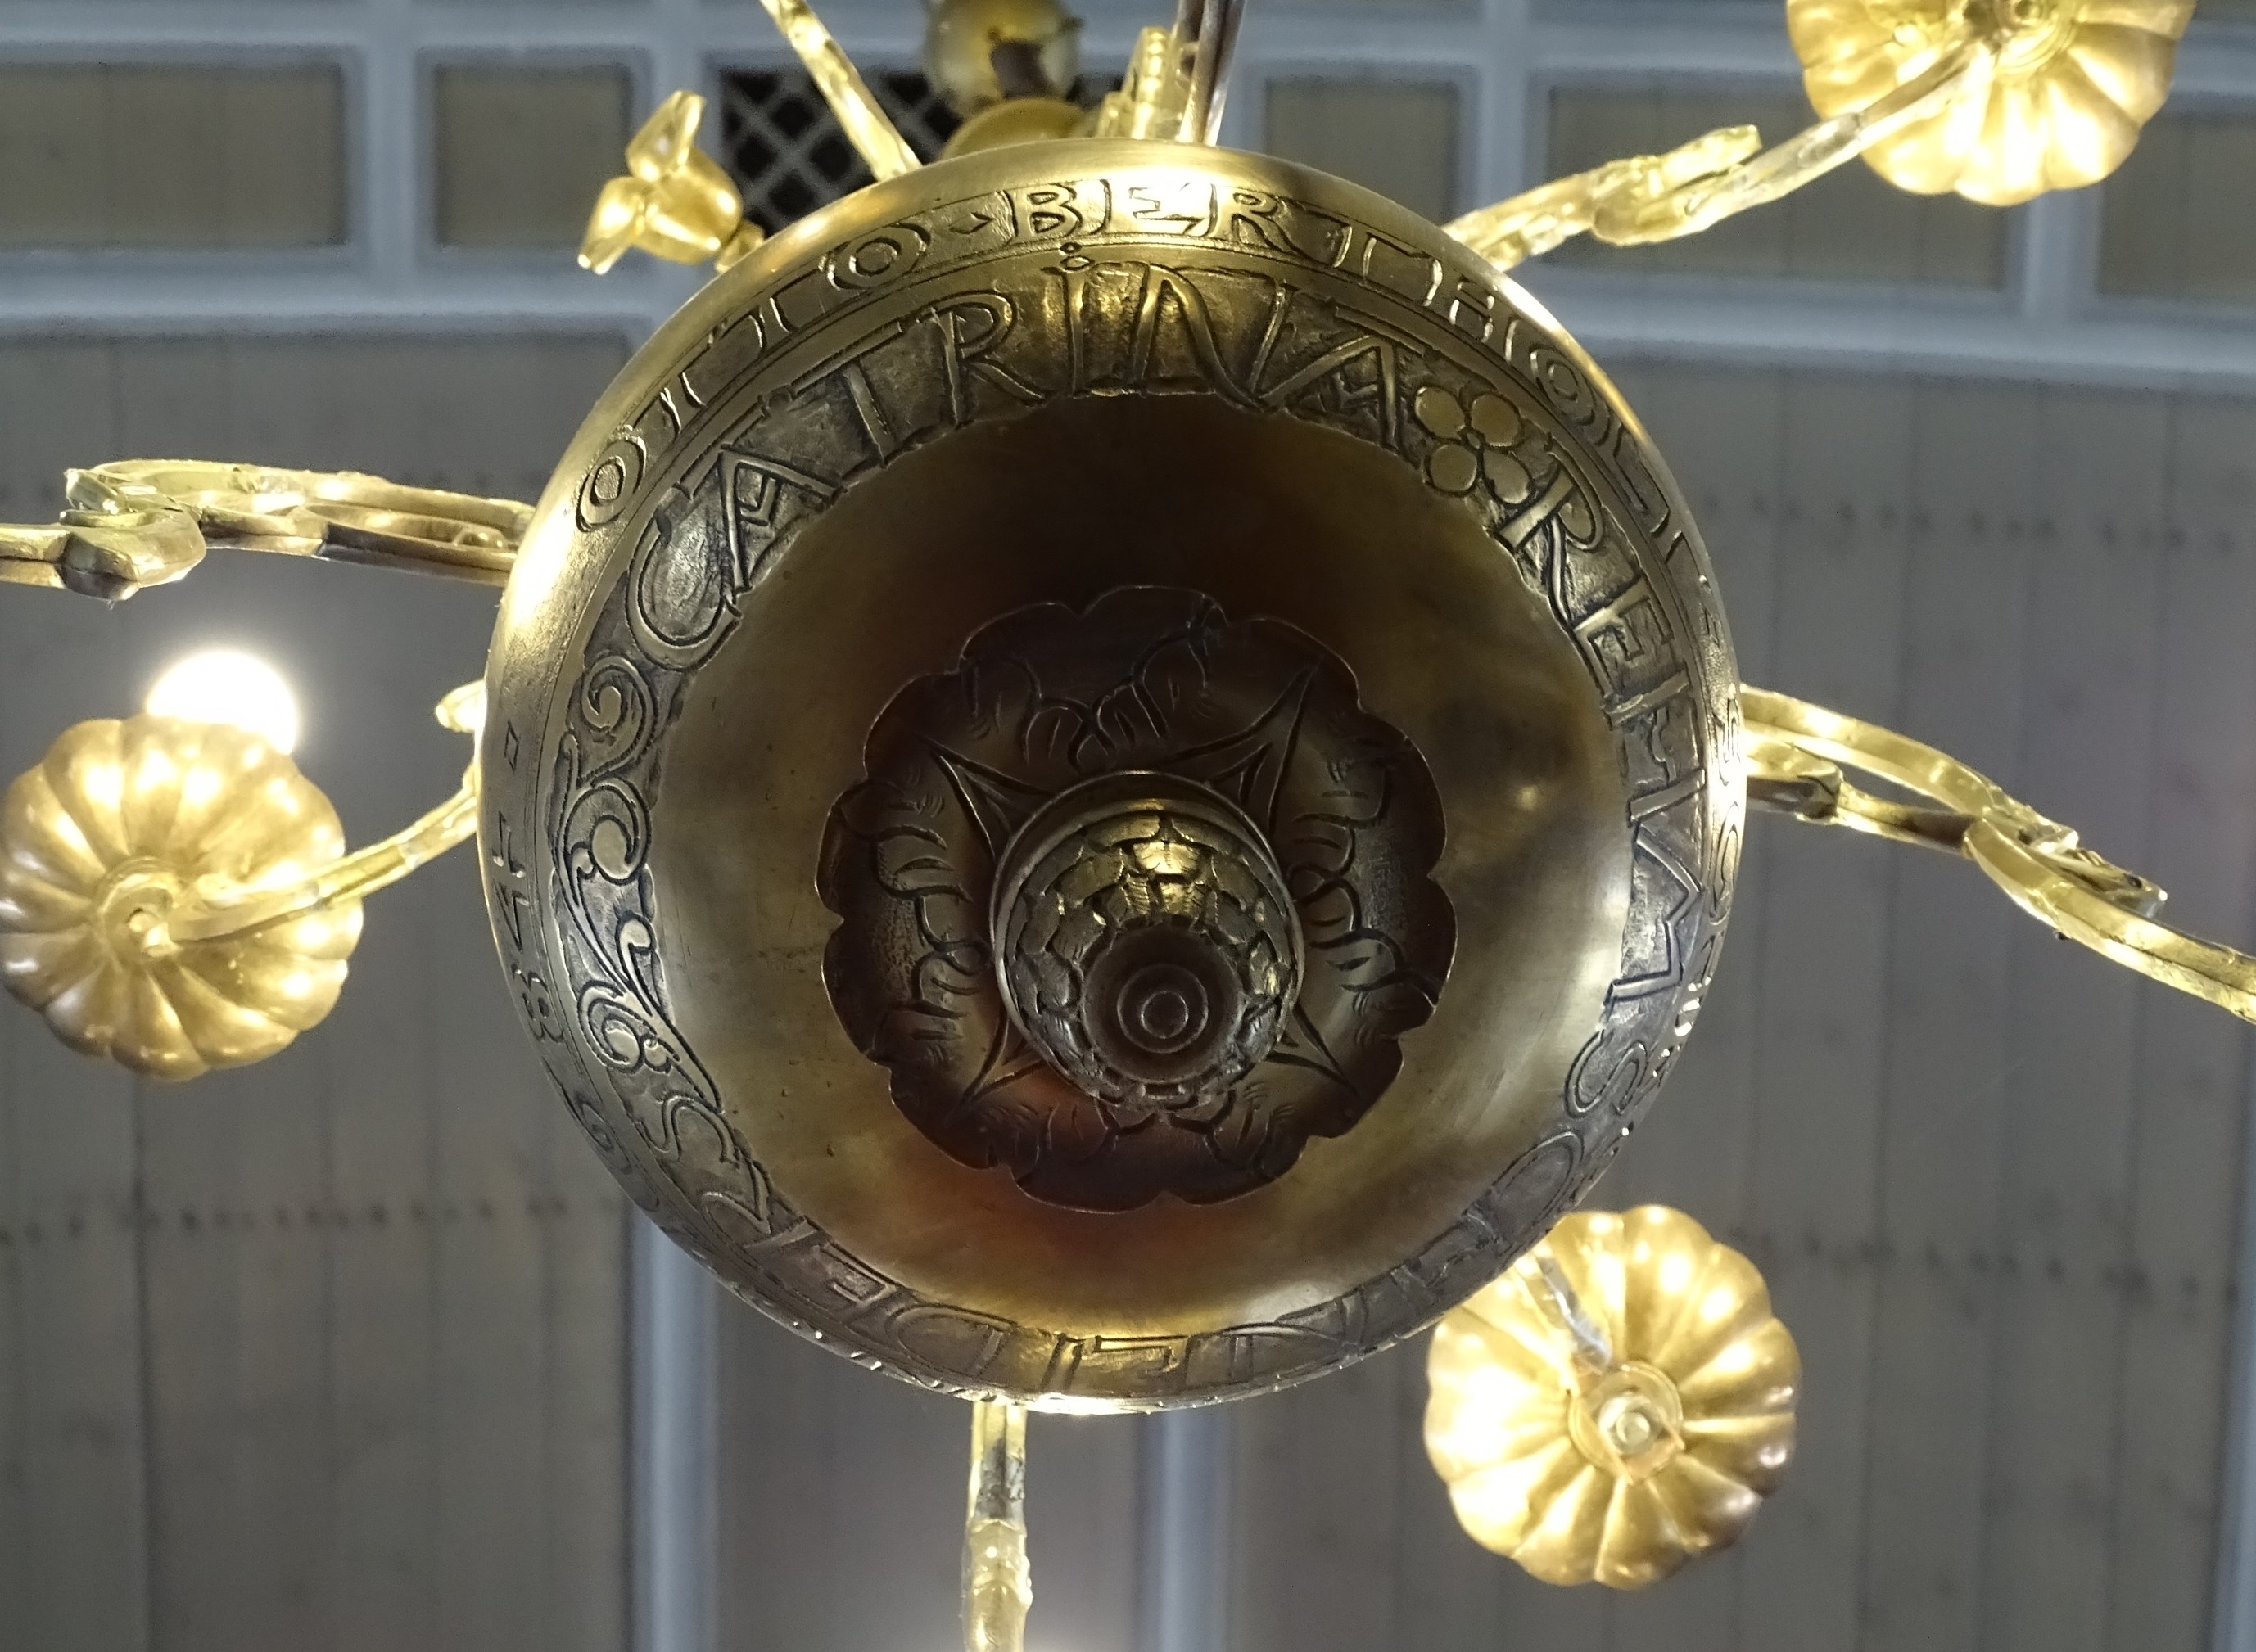 Fragment of the chandelier, 1684, Tukums Holy Trinity Evangelical Lutheran Church. Photo by Alantė Valtaitė-Gagač, 2021